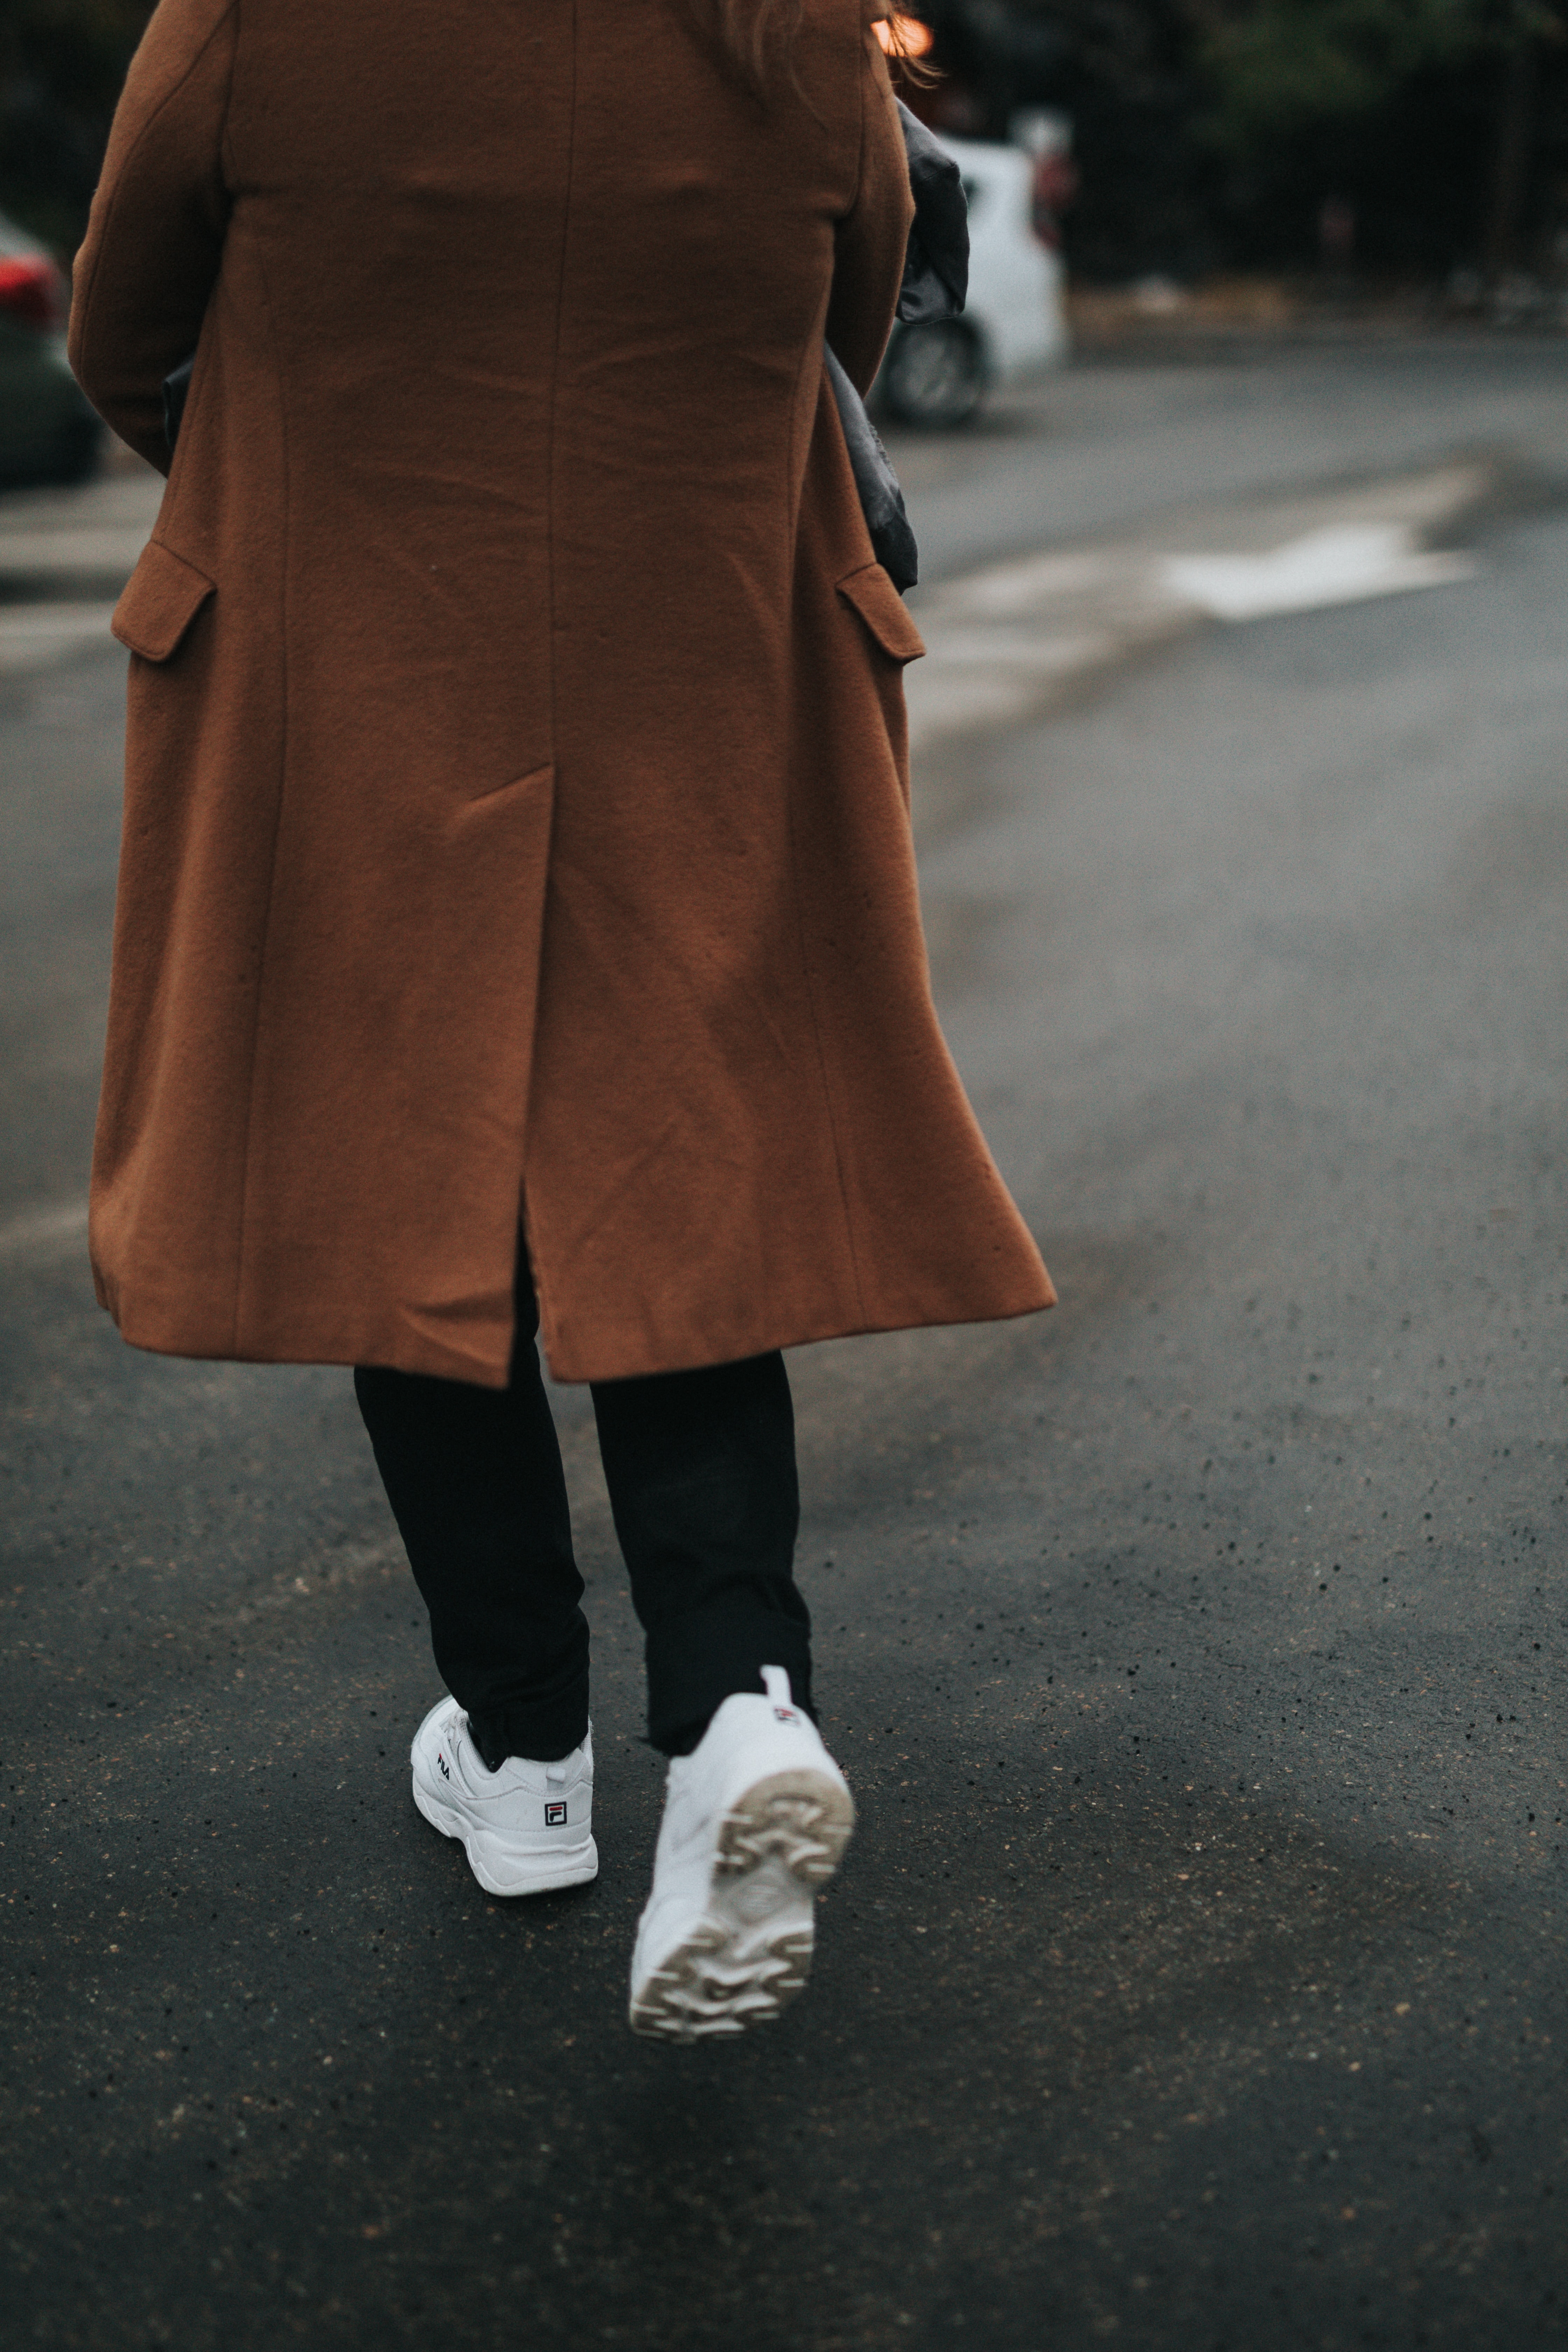 miscellanea, miscellaneous, sneakers, style, human, person, clothing, coat